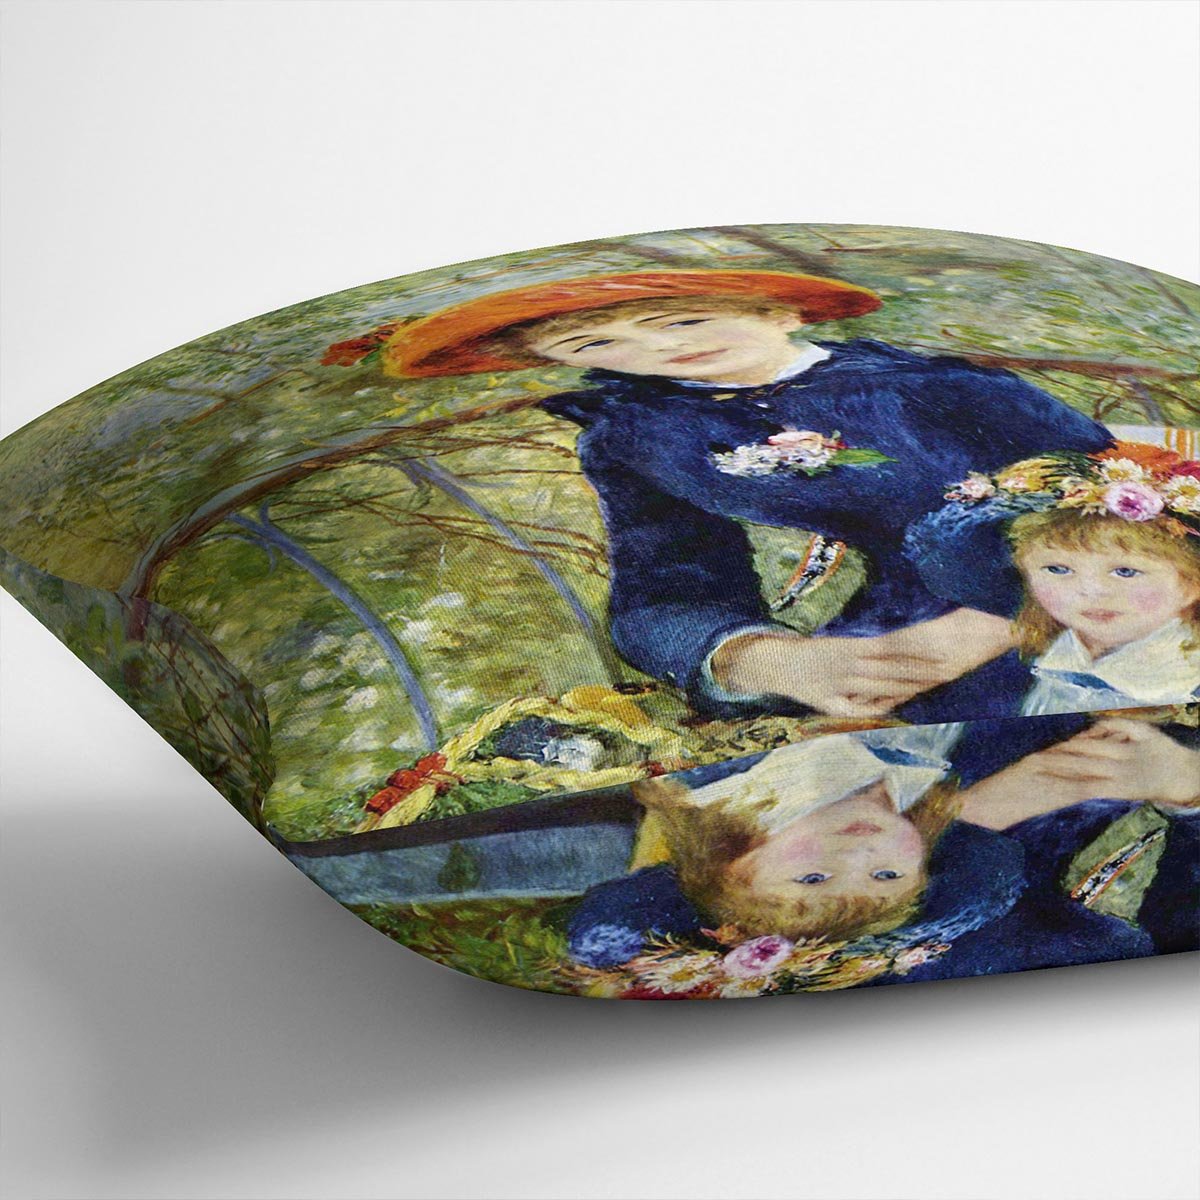 Two Sisters On The Terrace by Renoir Throw Pillow